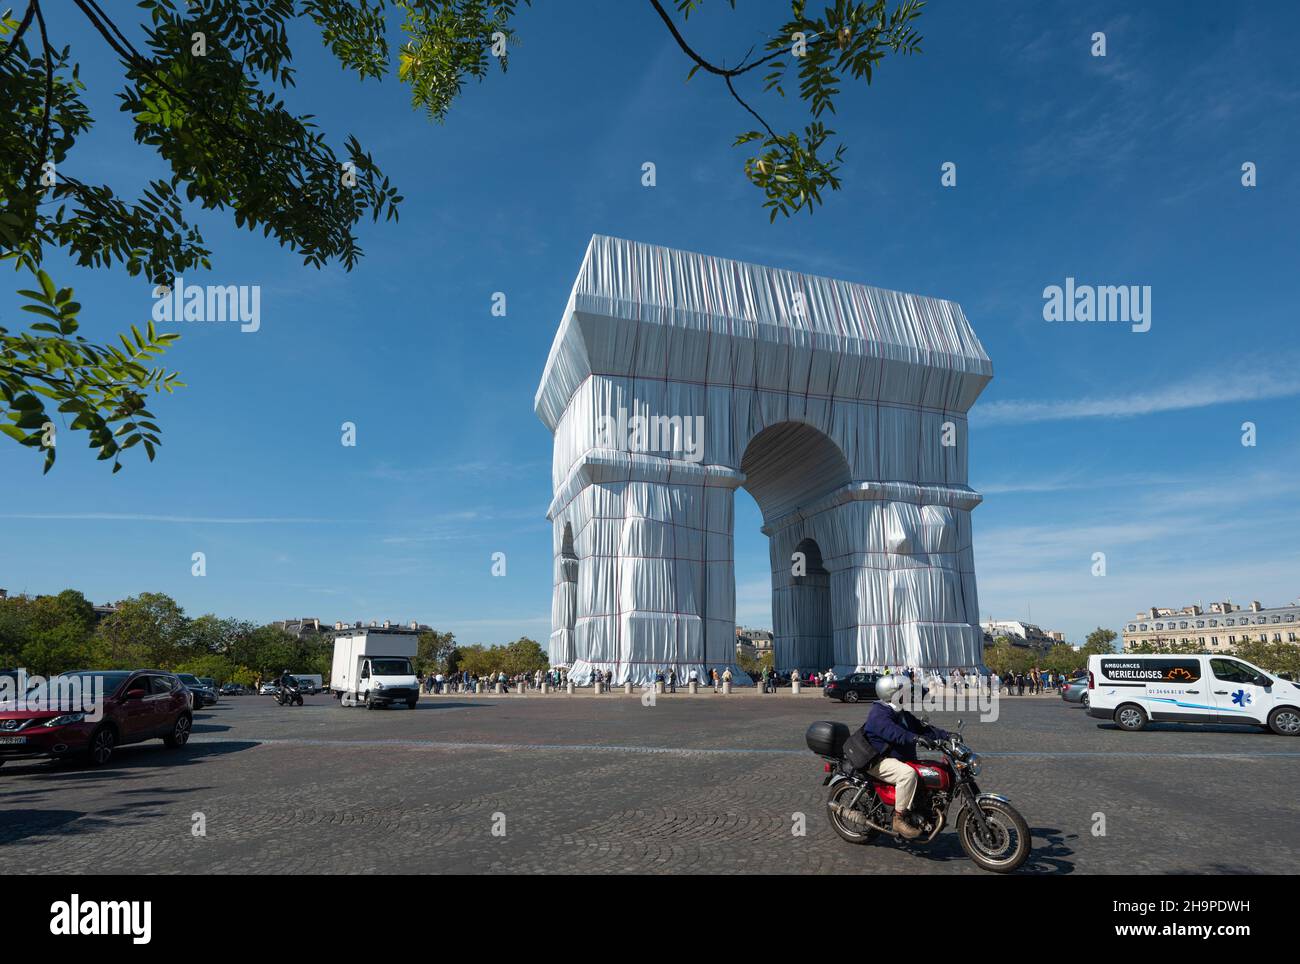 Paris (France), September 22, 2021: “L'Arc de Triomphe Wrapped”, the Arc de Triomphe covered with fabric, temporary work by Christo and Jeanne-Claude, Stock Photo